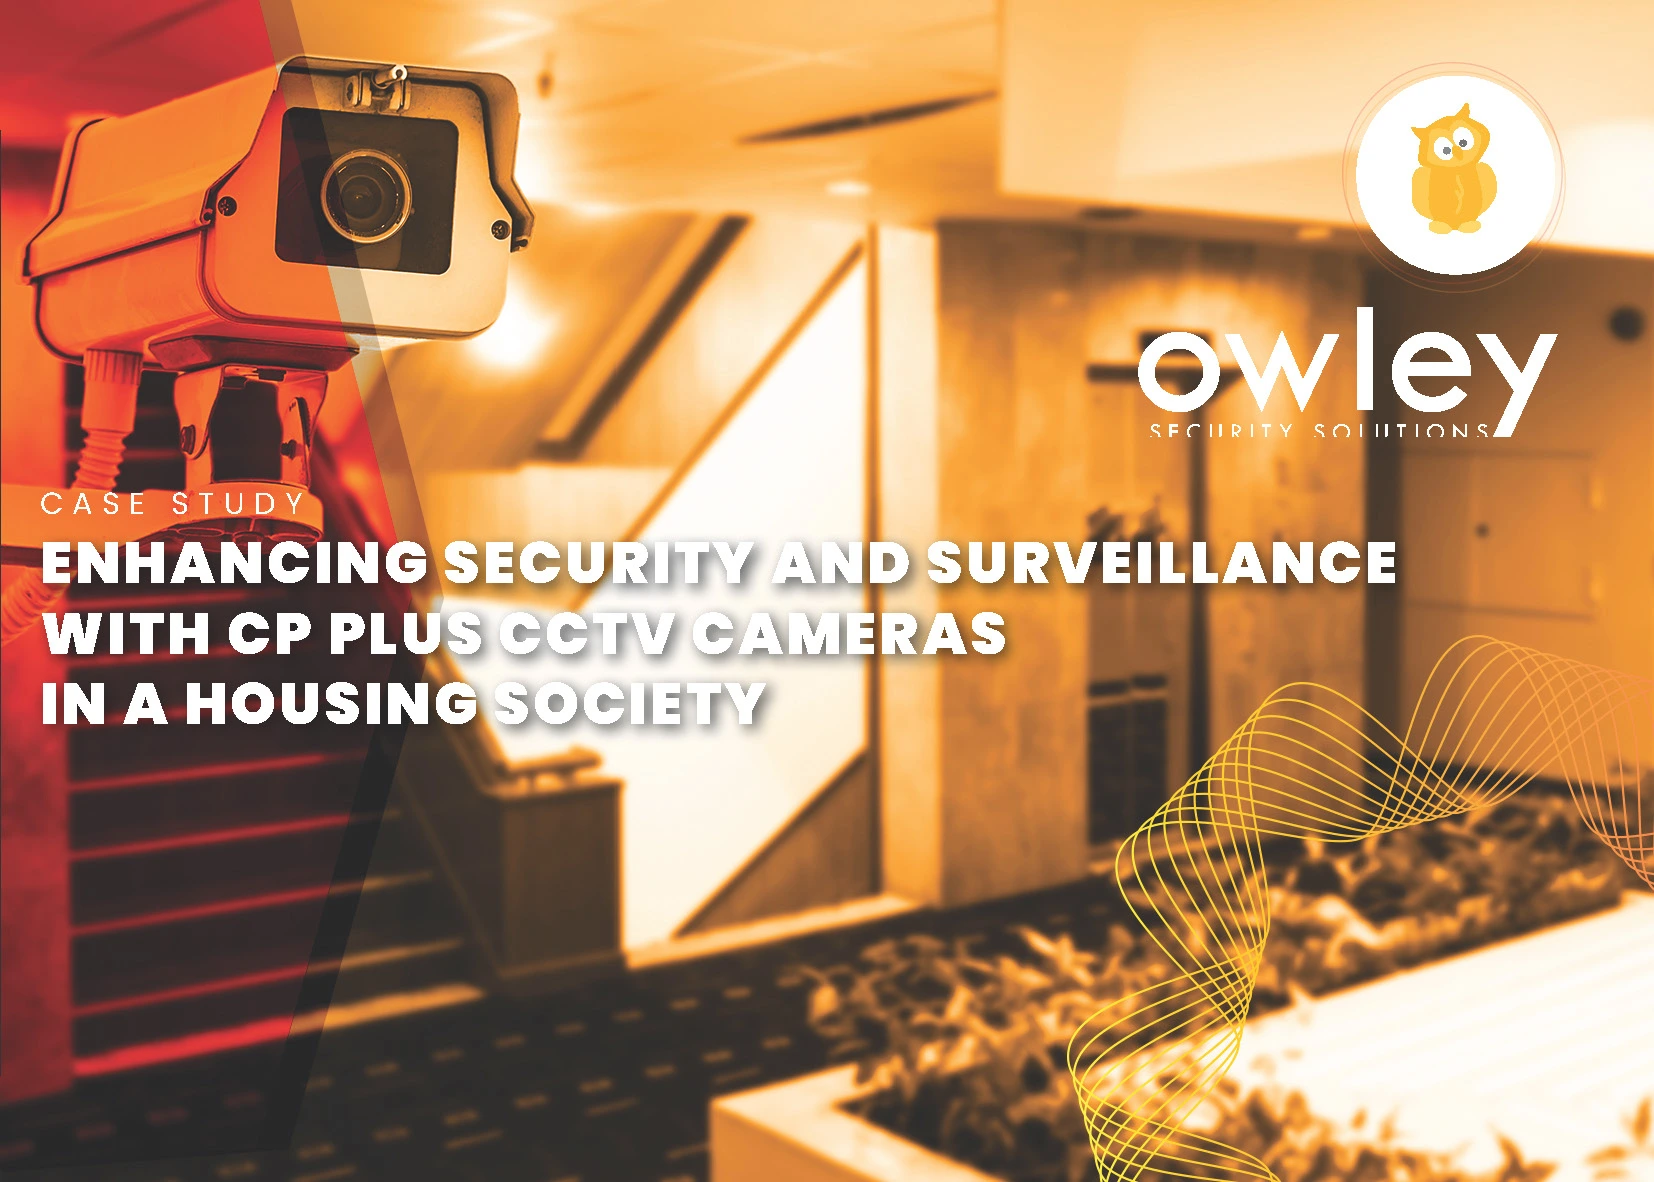 Explore how Banyan Tree Brandvisers' CCTV solutions transformed security in a real housing colony case study.